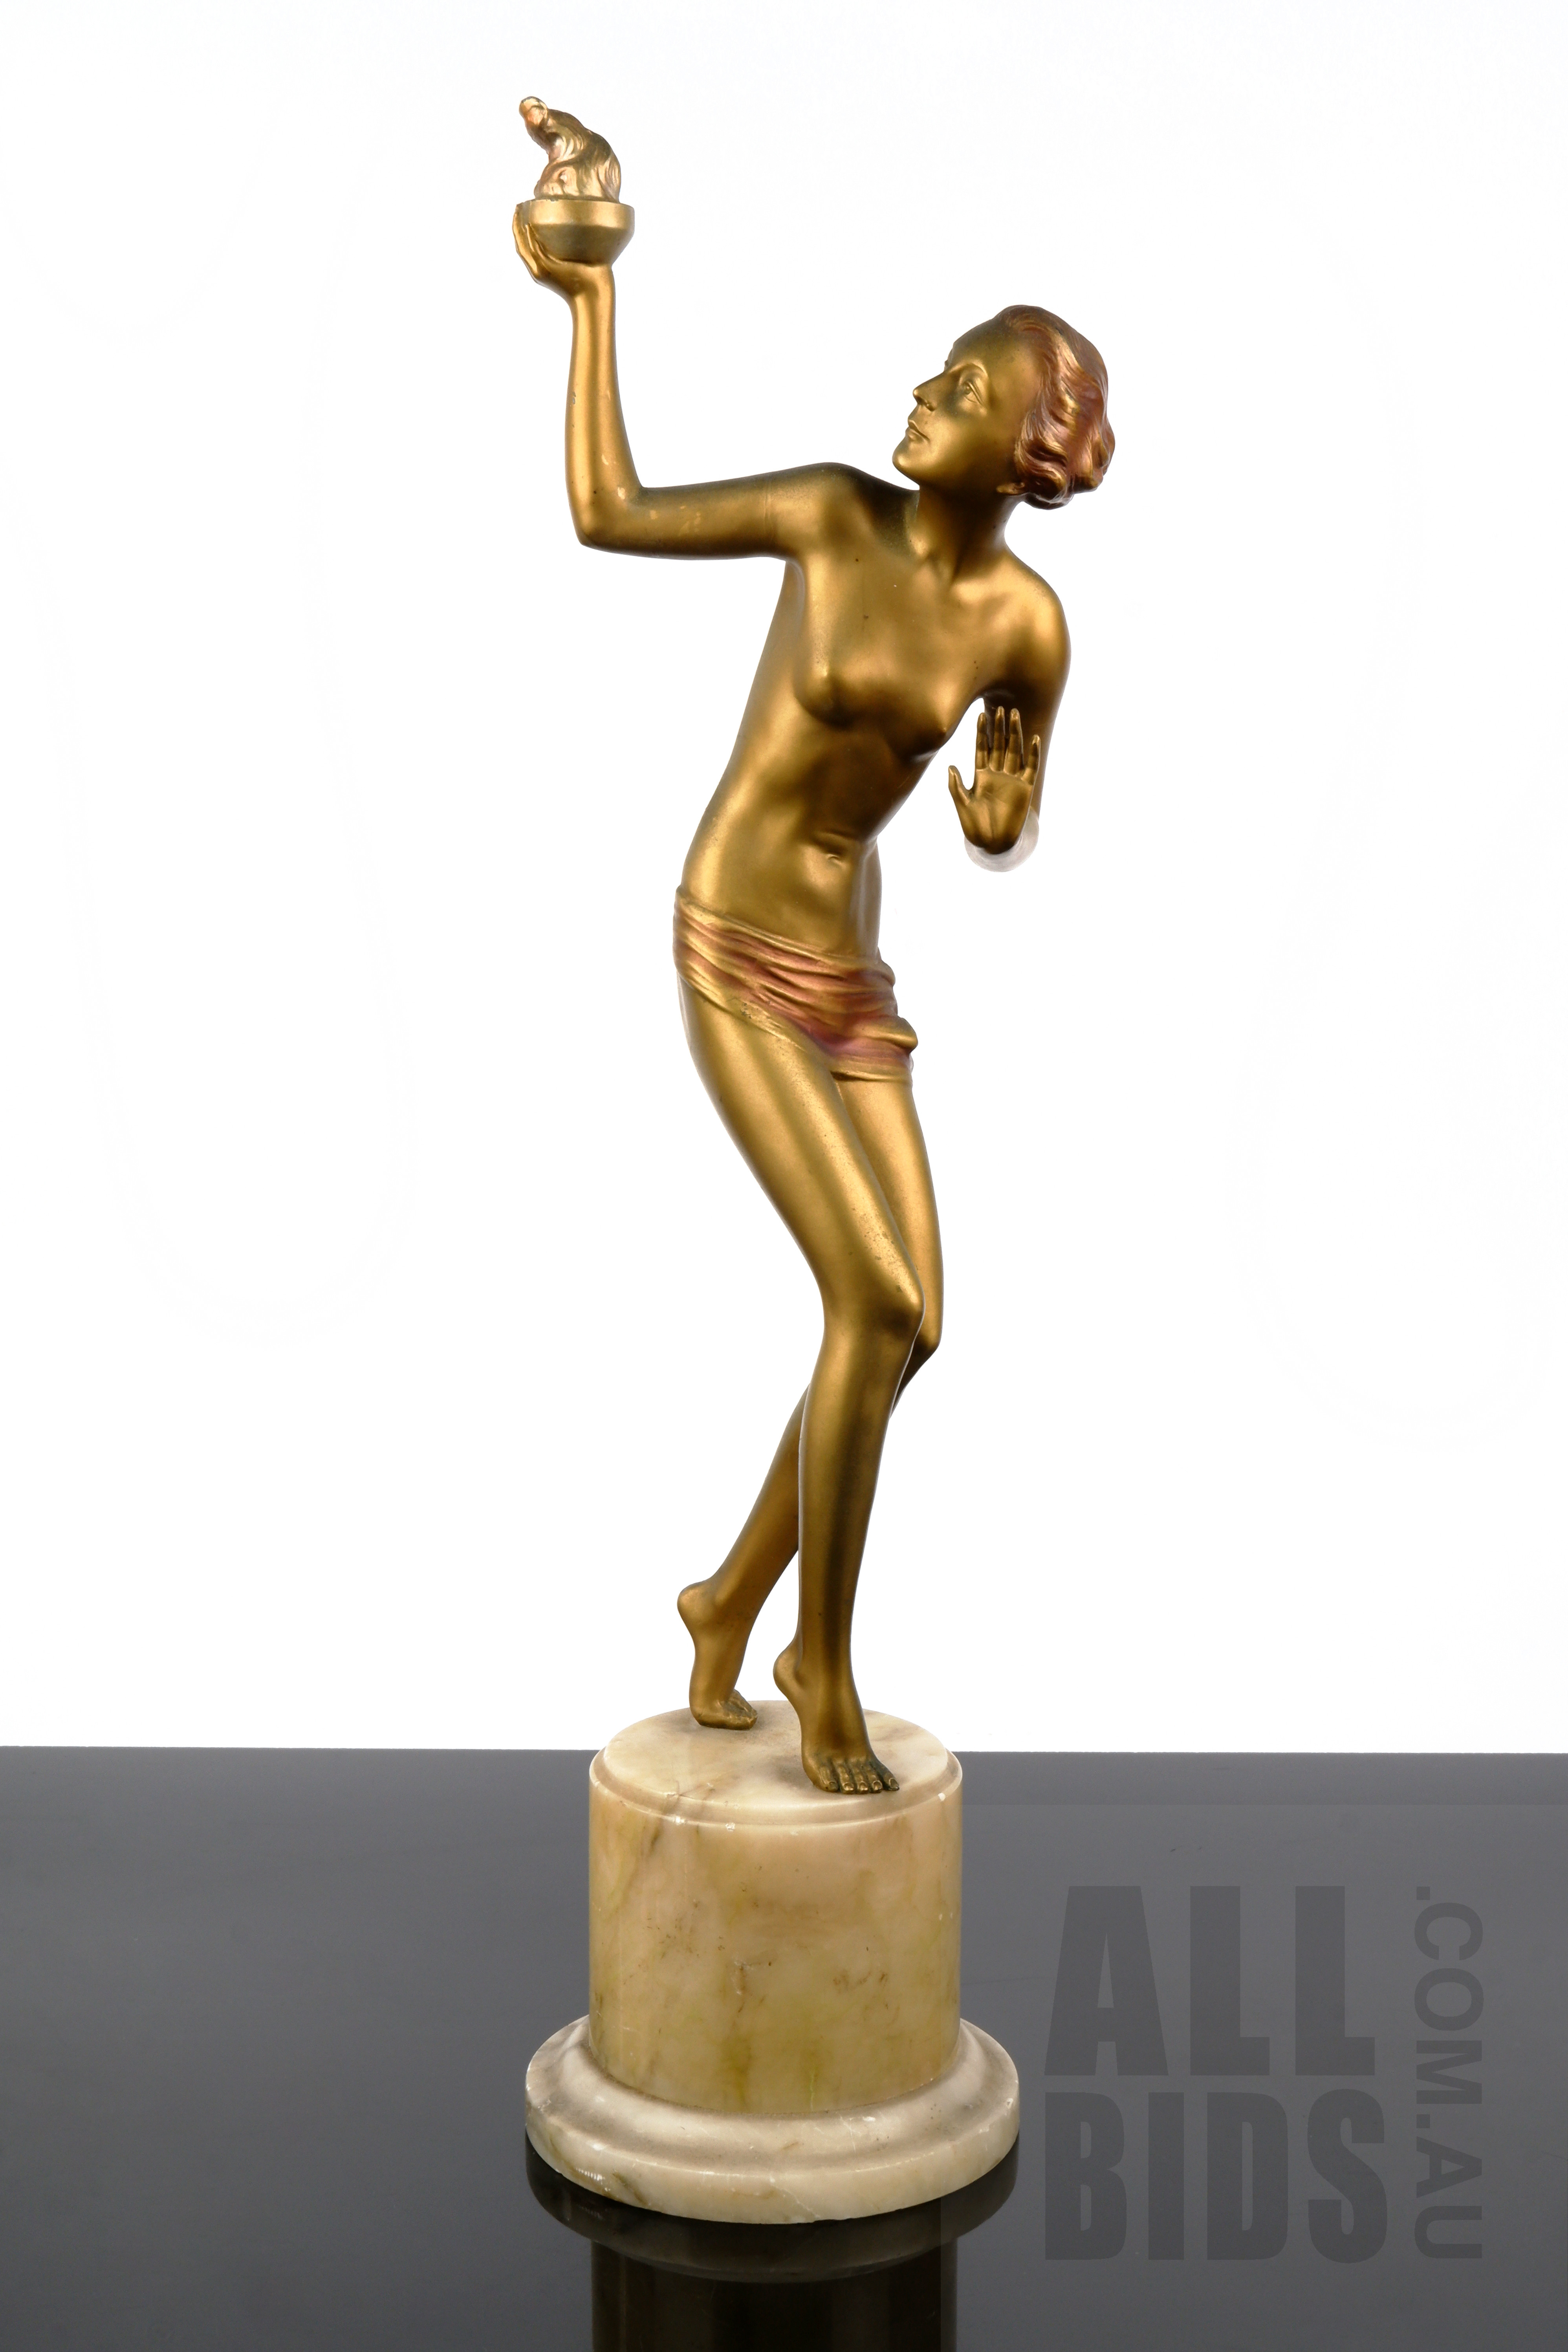 'Large Period Art Deco Cold Painted Spelter Figure of a Flame Dancer on an Alabaster Socle, Circa 1920s, Probably French or Austrian'